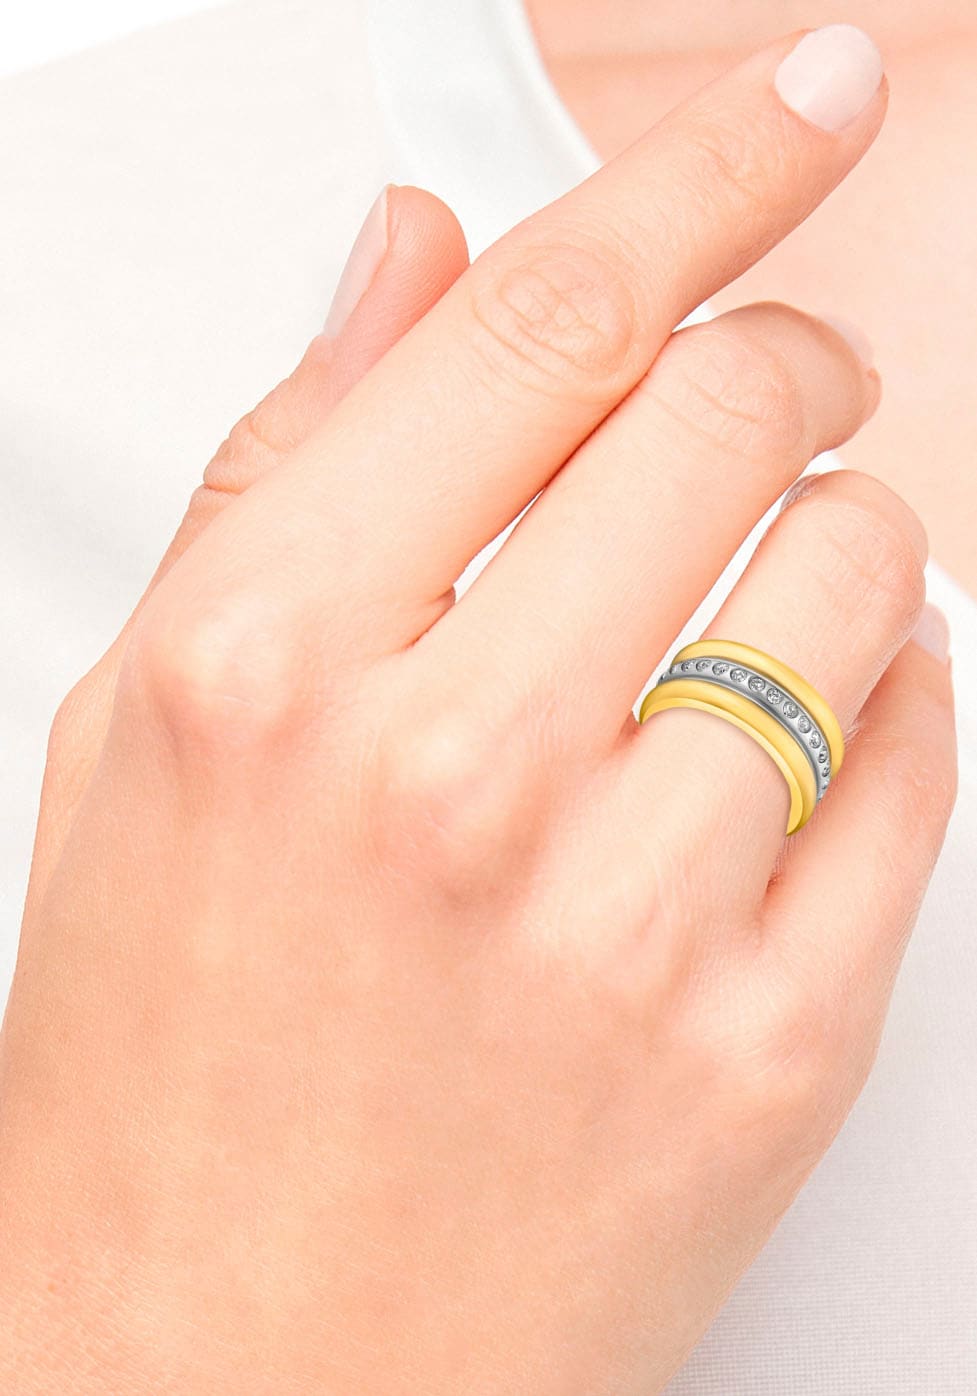 »2036837/-38/-39/-40«, s.Oliver ♕ bei Fingerring mit (synth.) Zirkonia